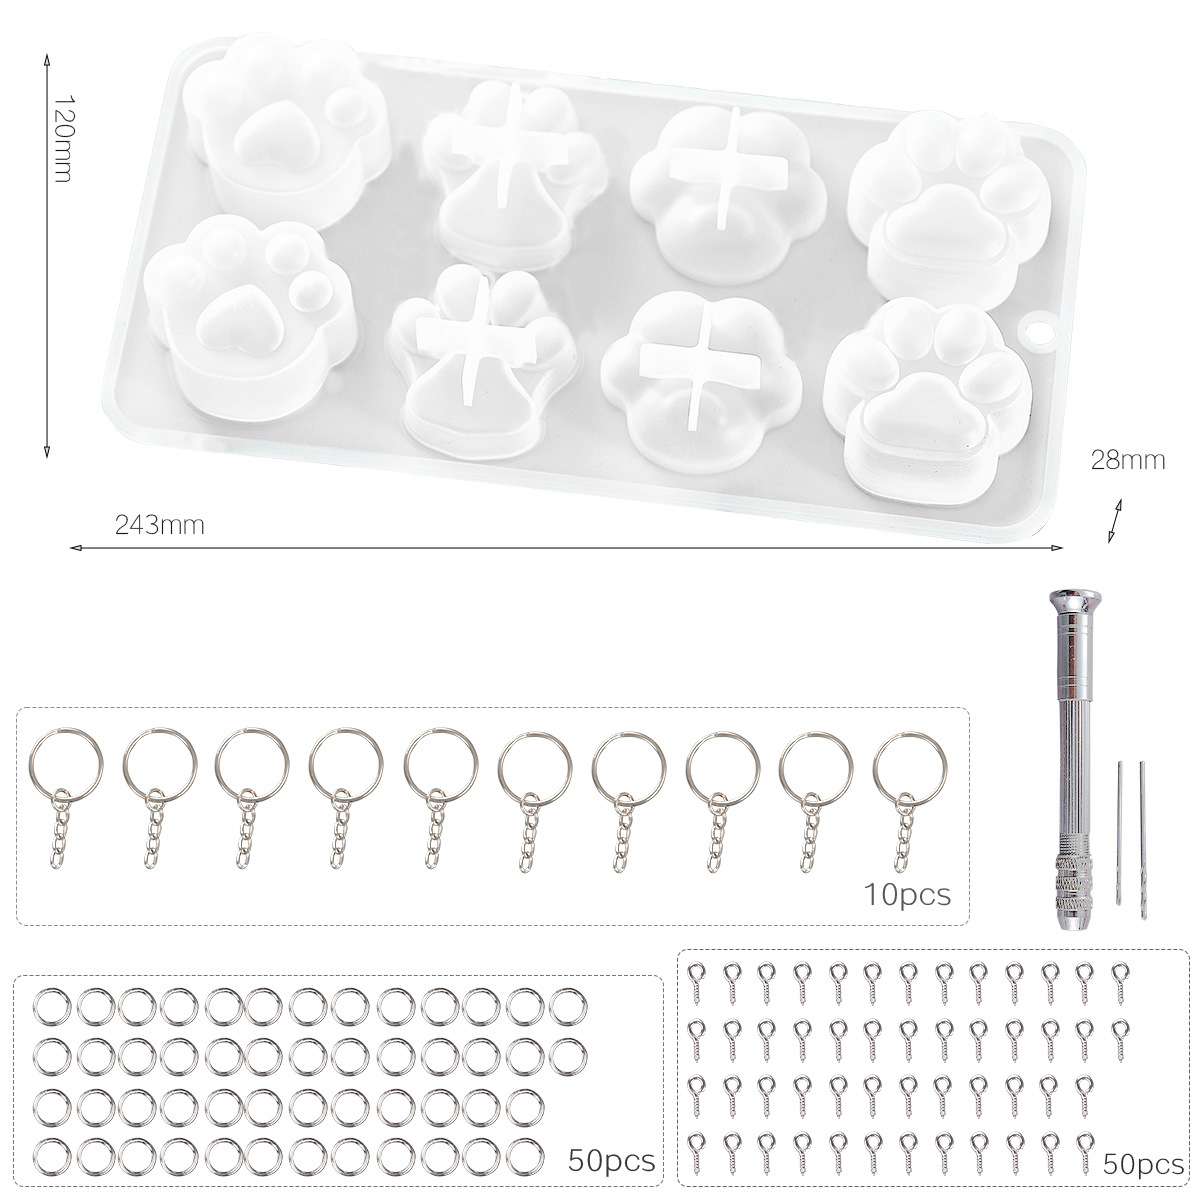 1:Claw key chain material package (114-piece set)